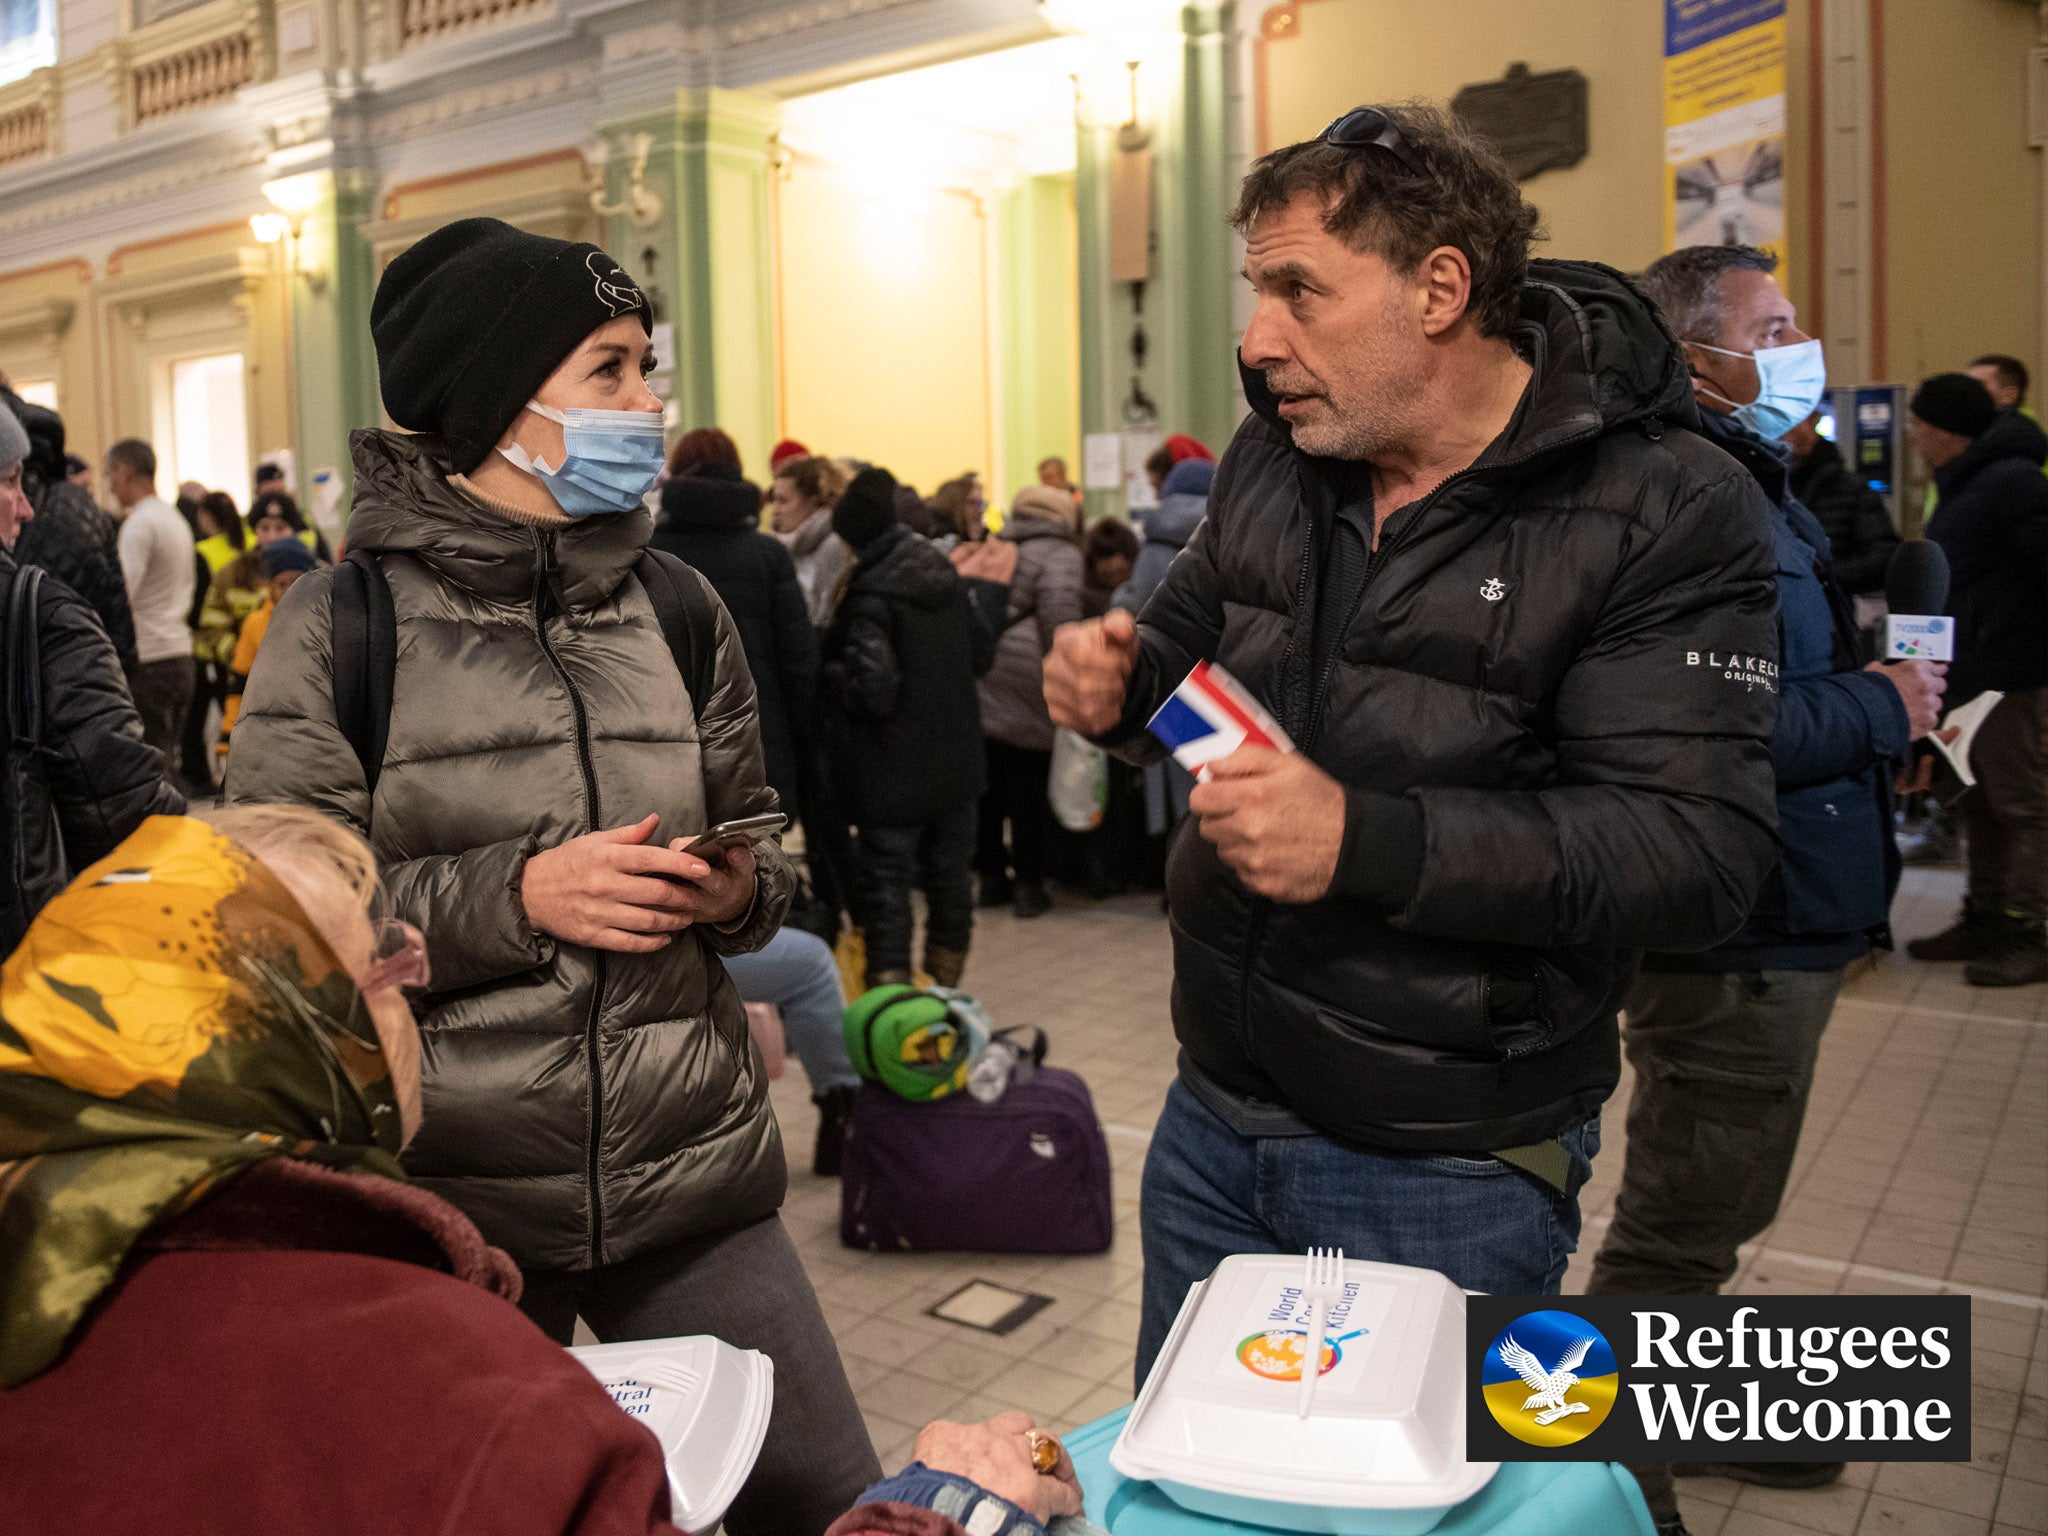 Refugees wait at Przemysl train station in Poland to continue their journey onward across Europe